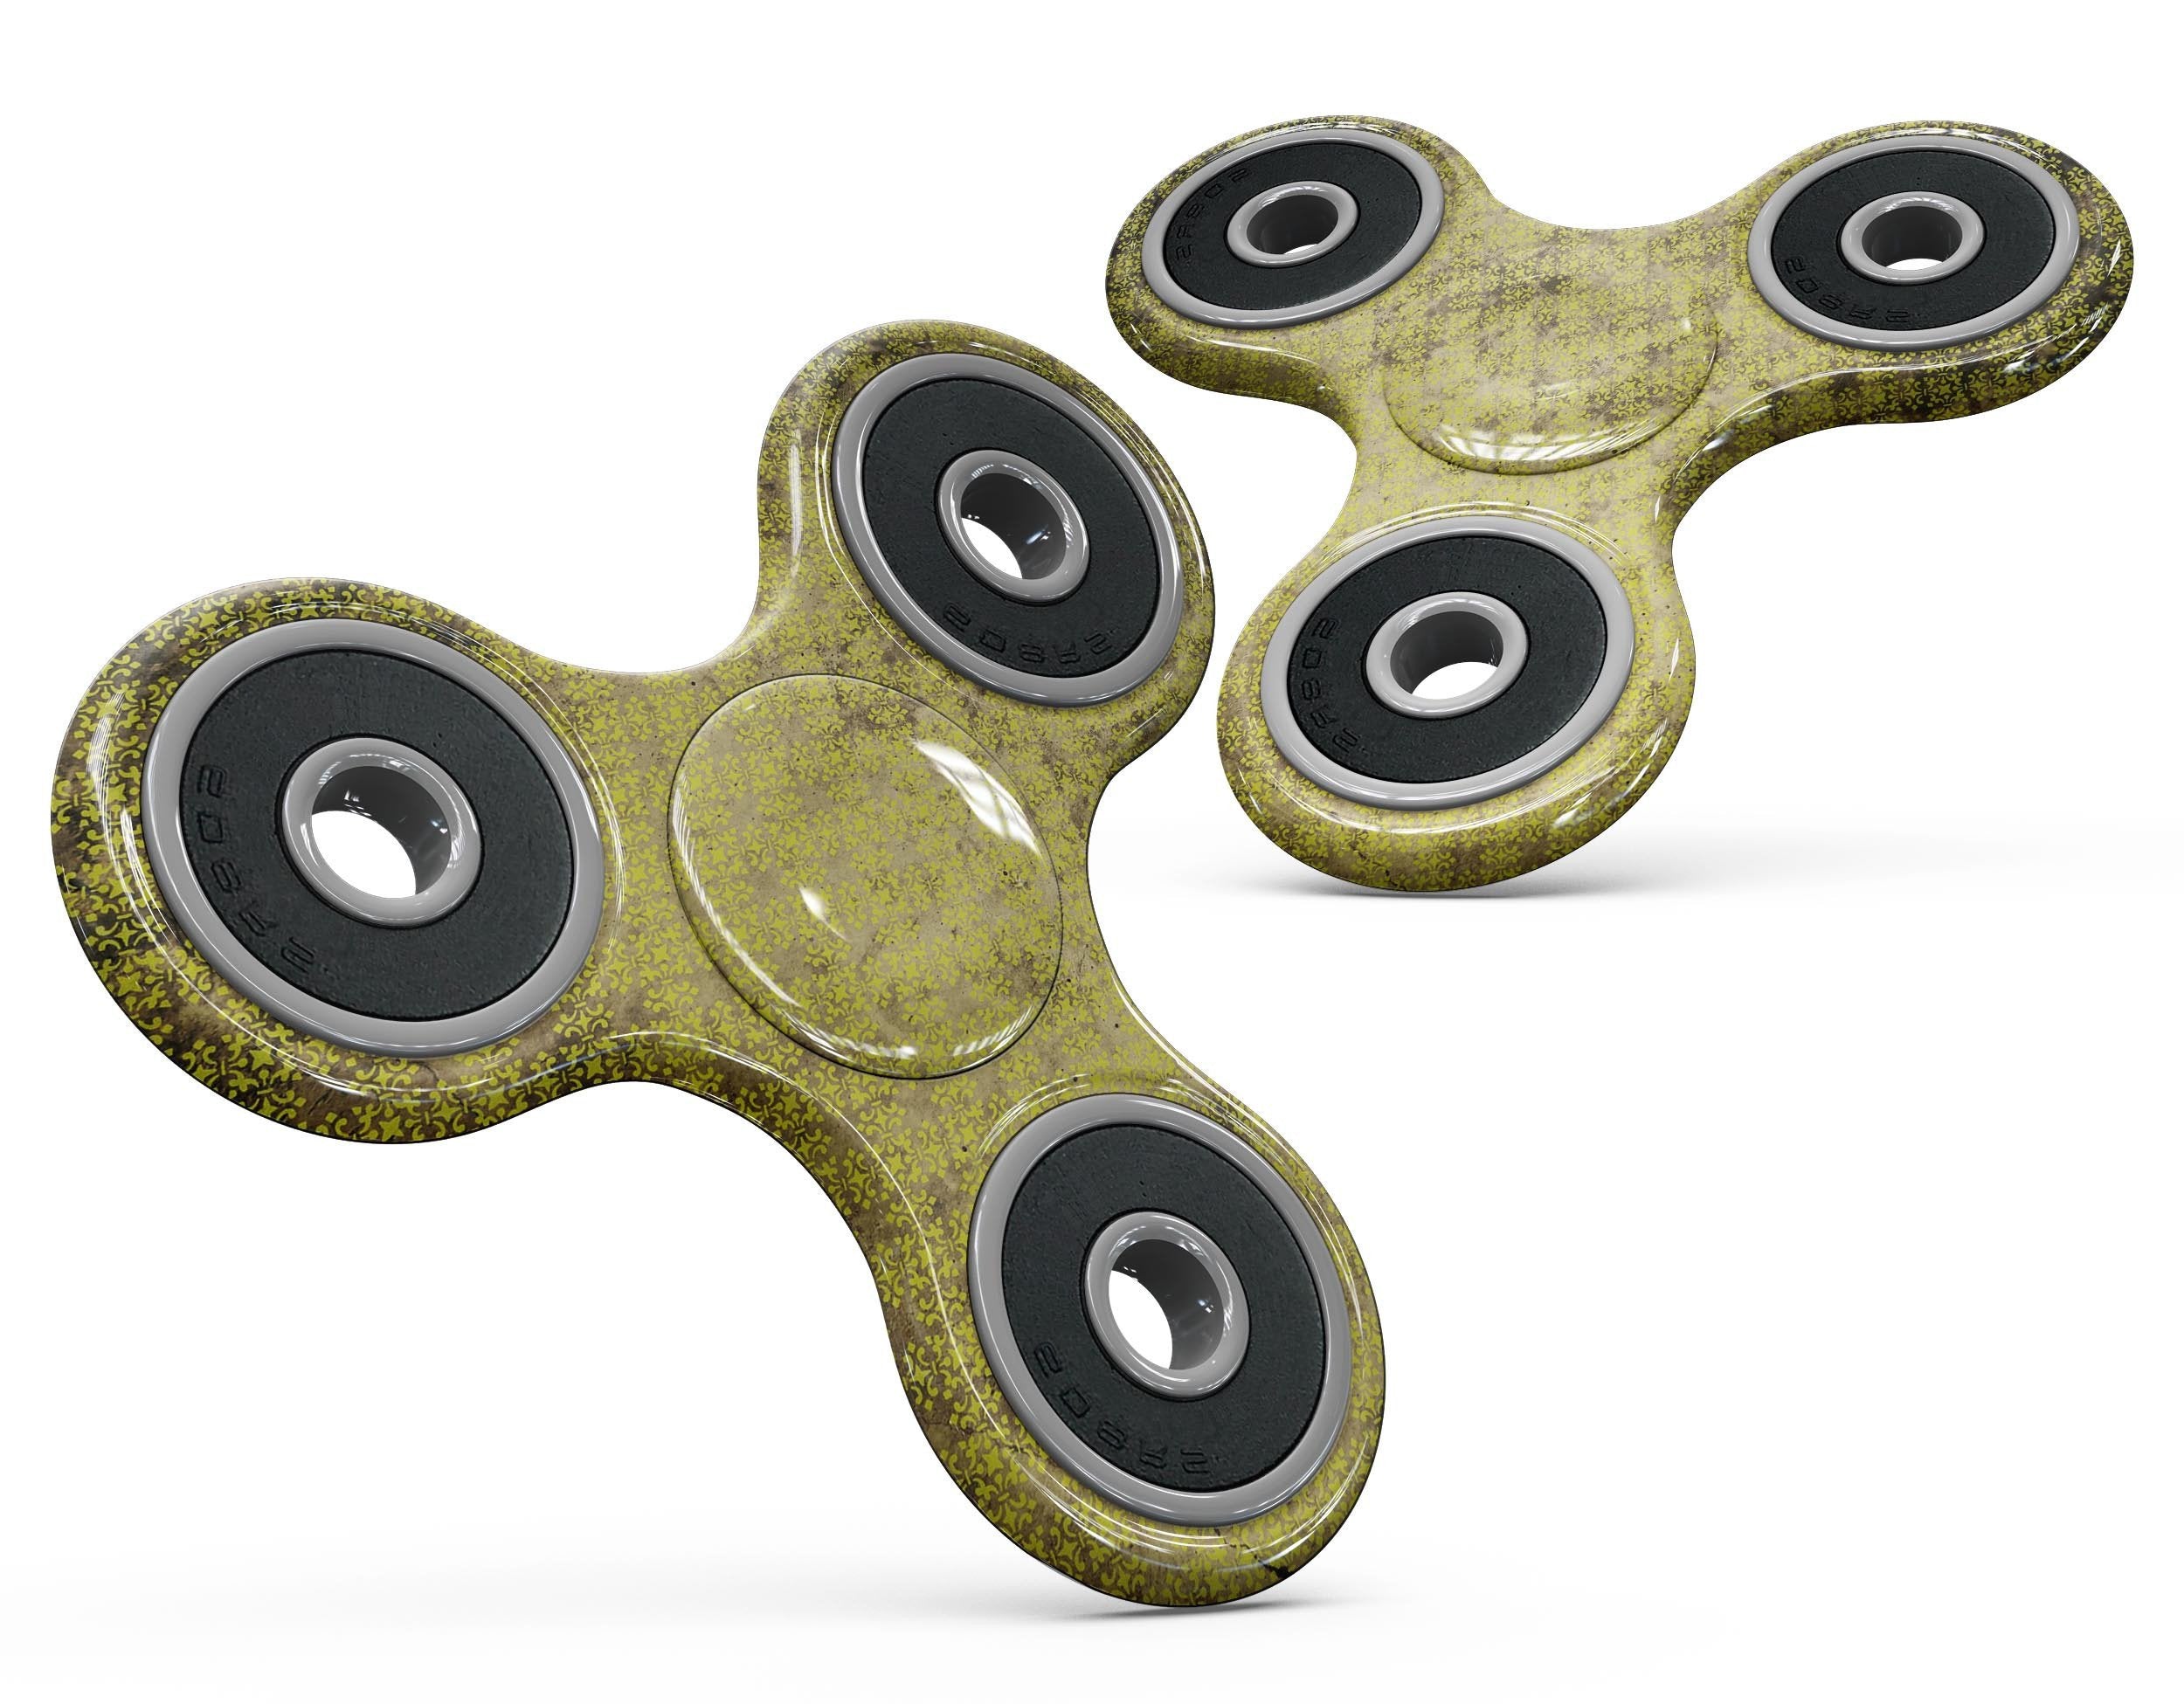 Grungy Black and Yellow Rococo Pattern Full-Body Fidget Spinner